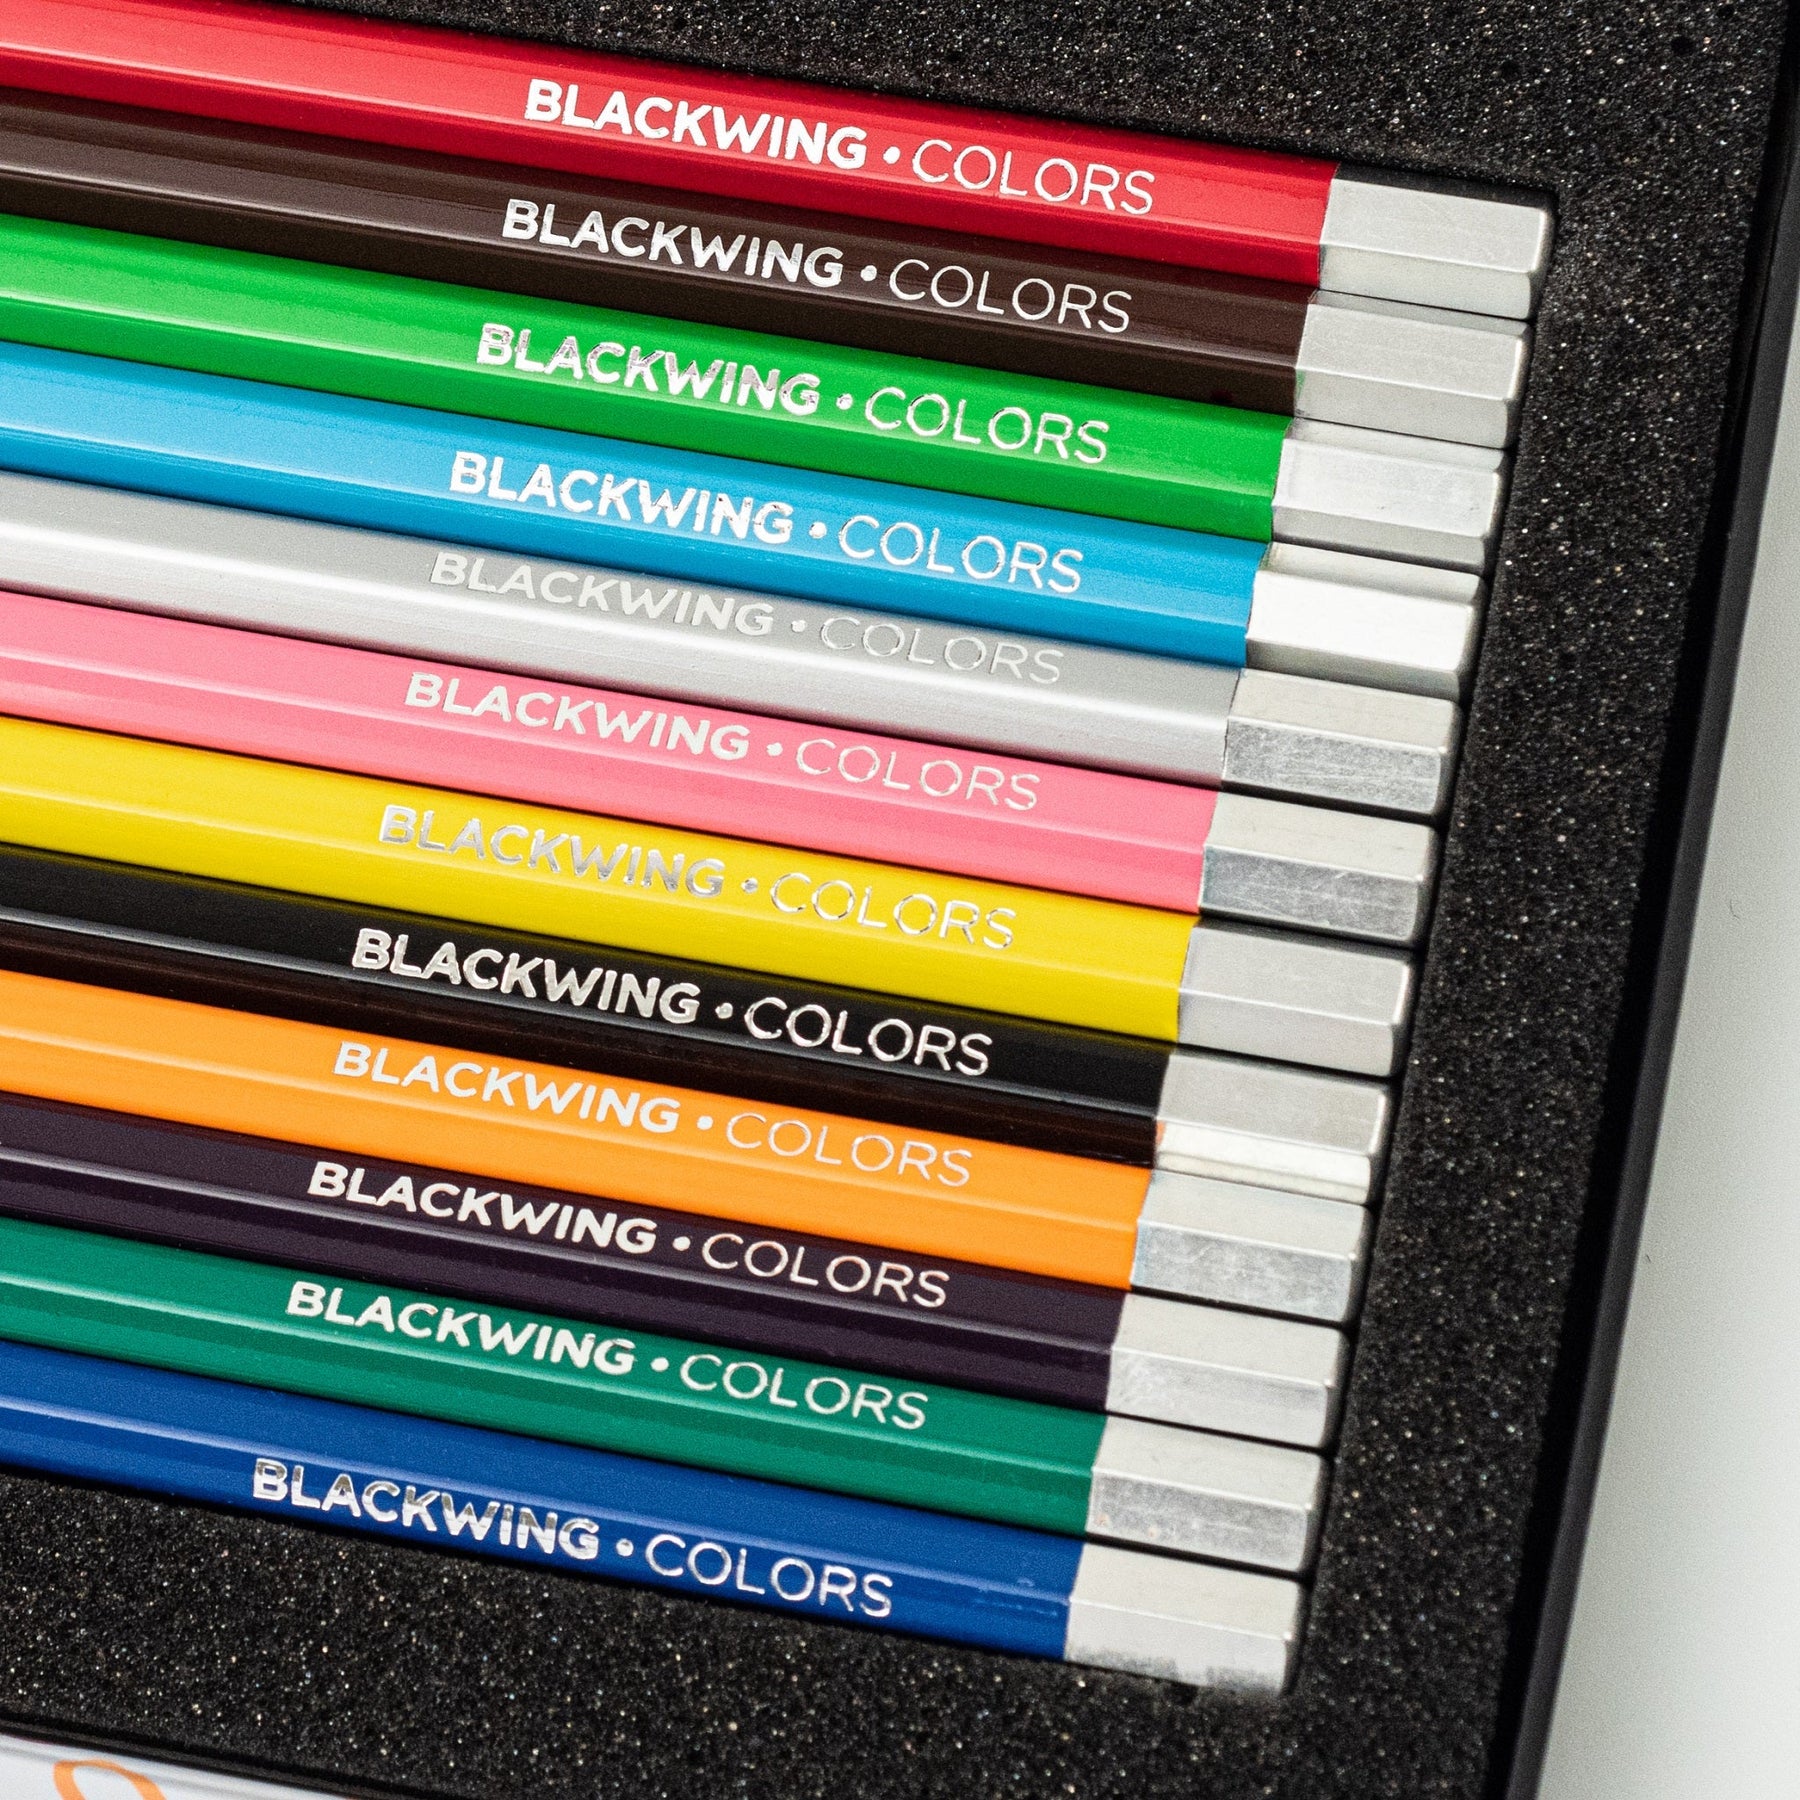 Blackwing Colors Colored Pencils